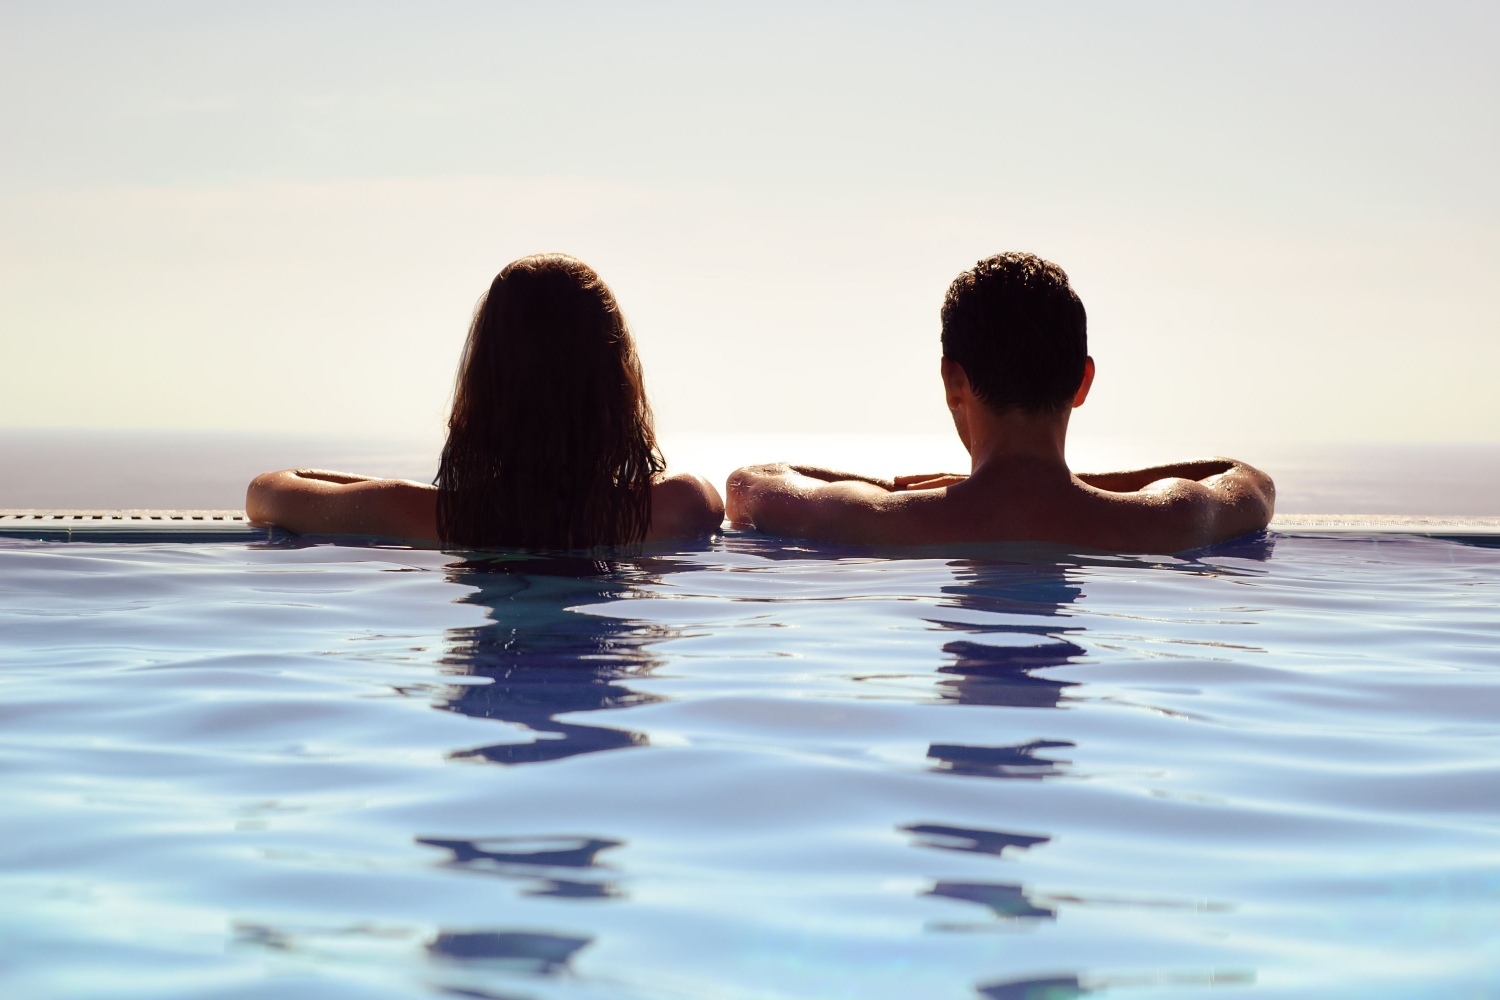 Man and woman in a pool looking out on the scenery